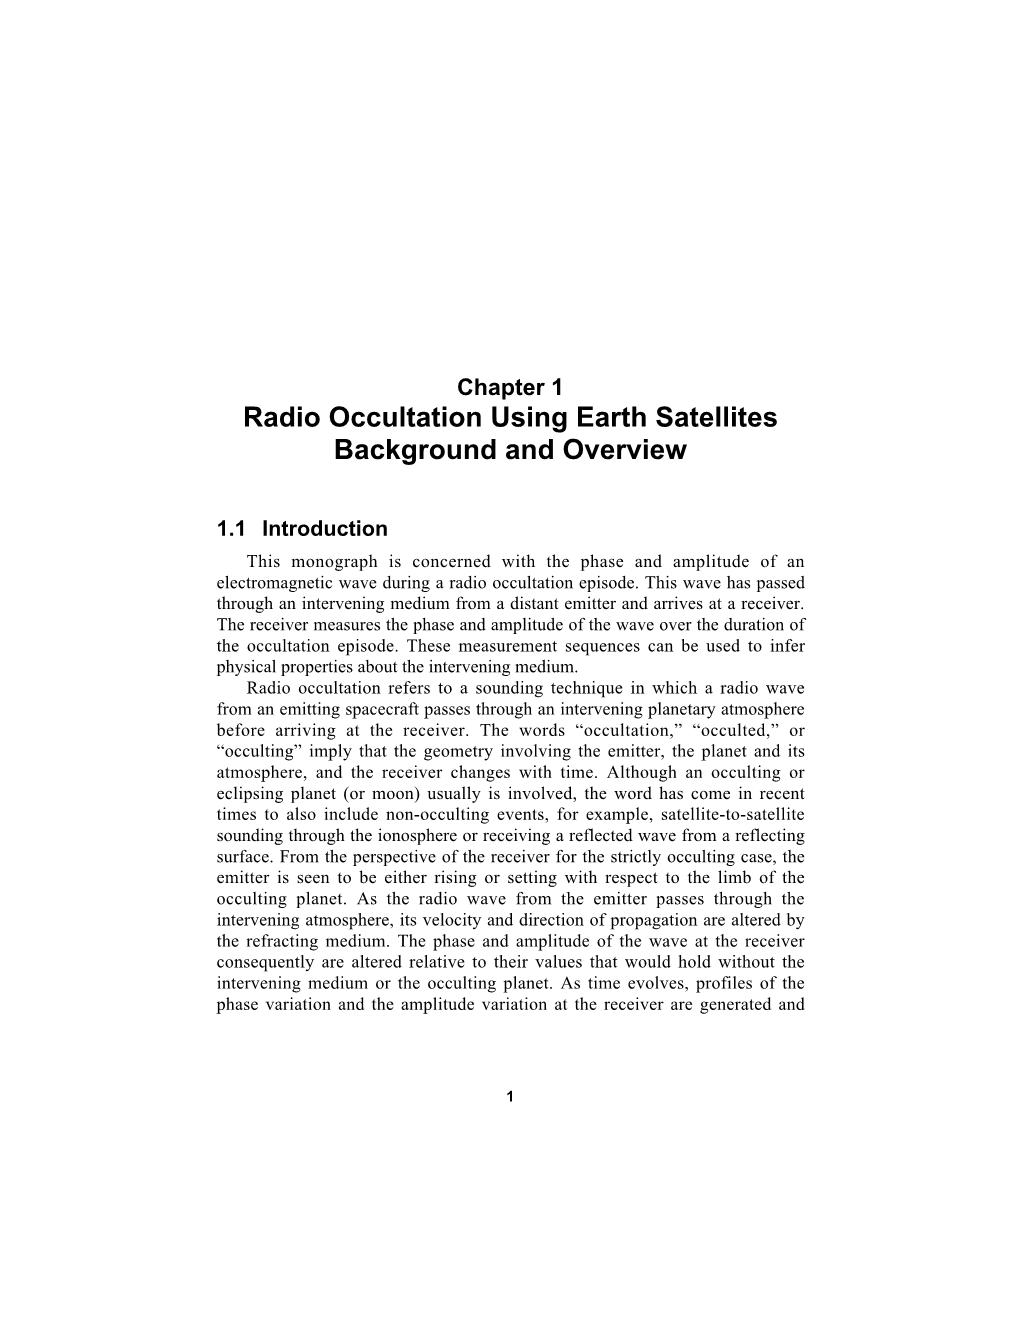 Radio Occultation Using Earth Satellites Background and Overview